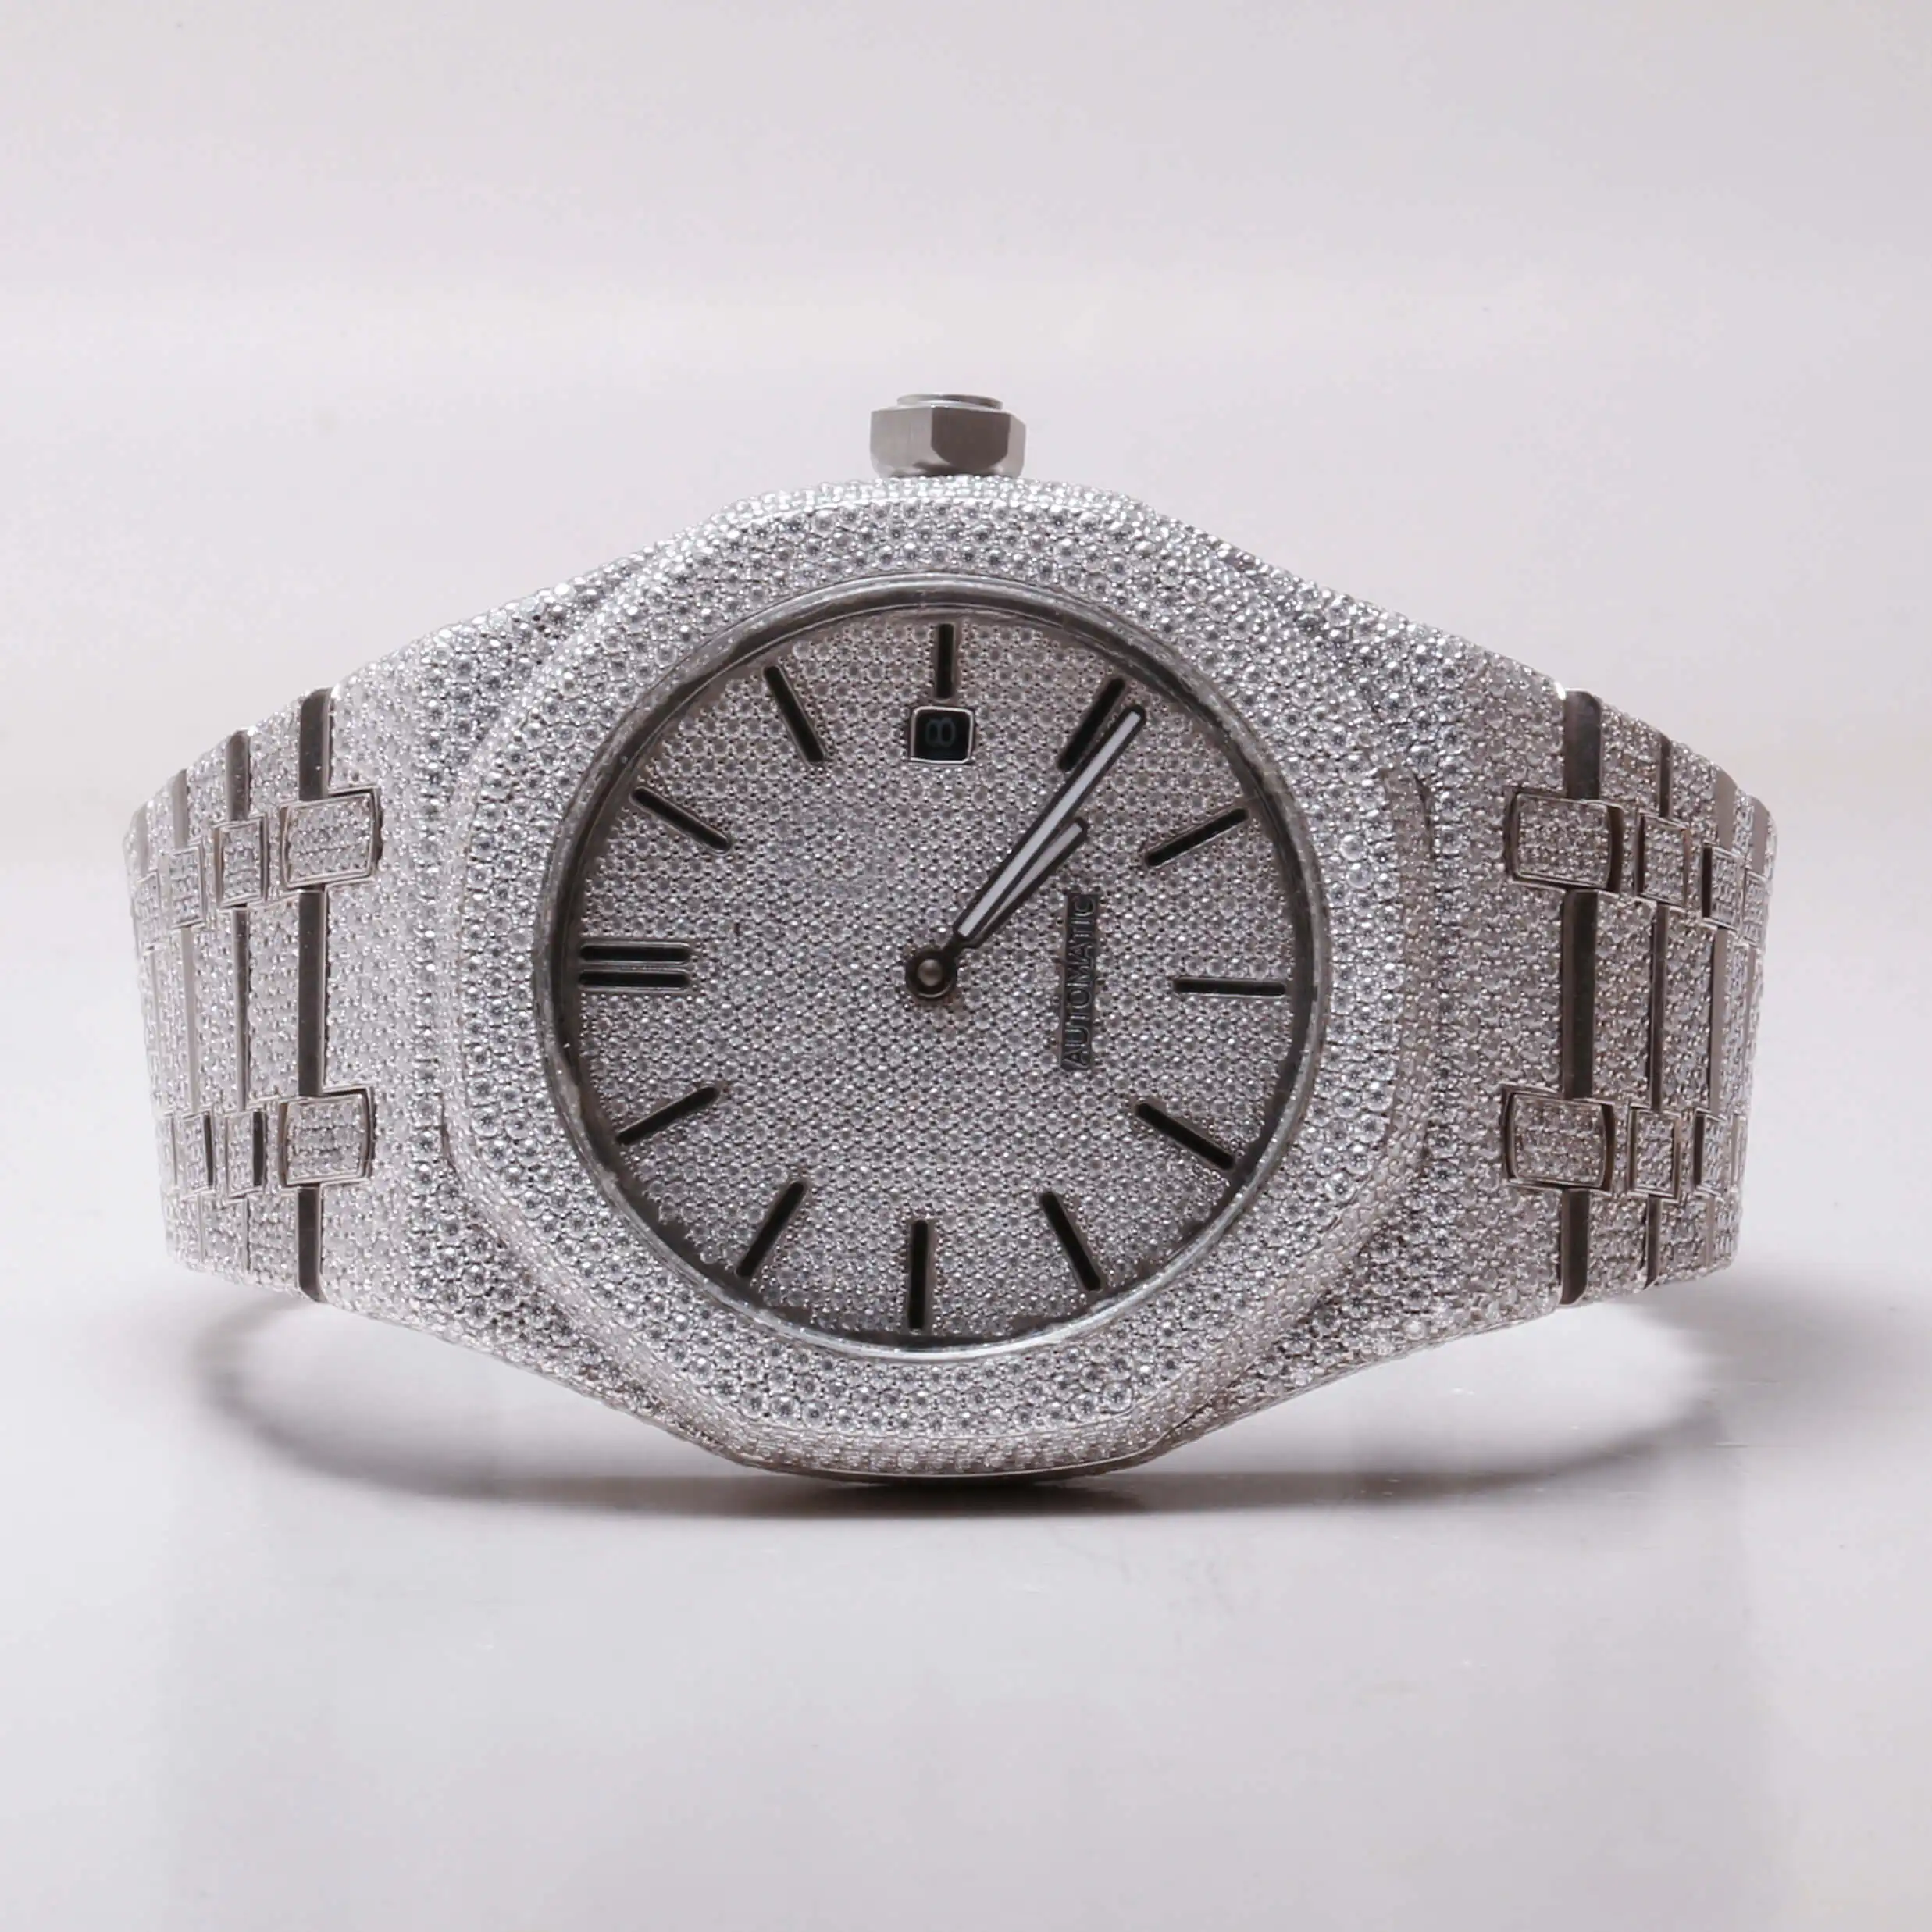 Elegant Stainless Steel Round Moissanite Watch / Iced Out Date Watch Automatic Movement Available